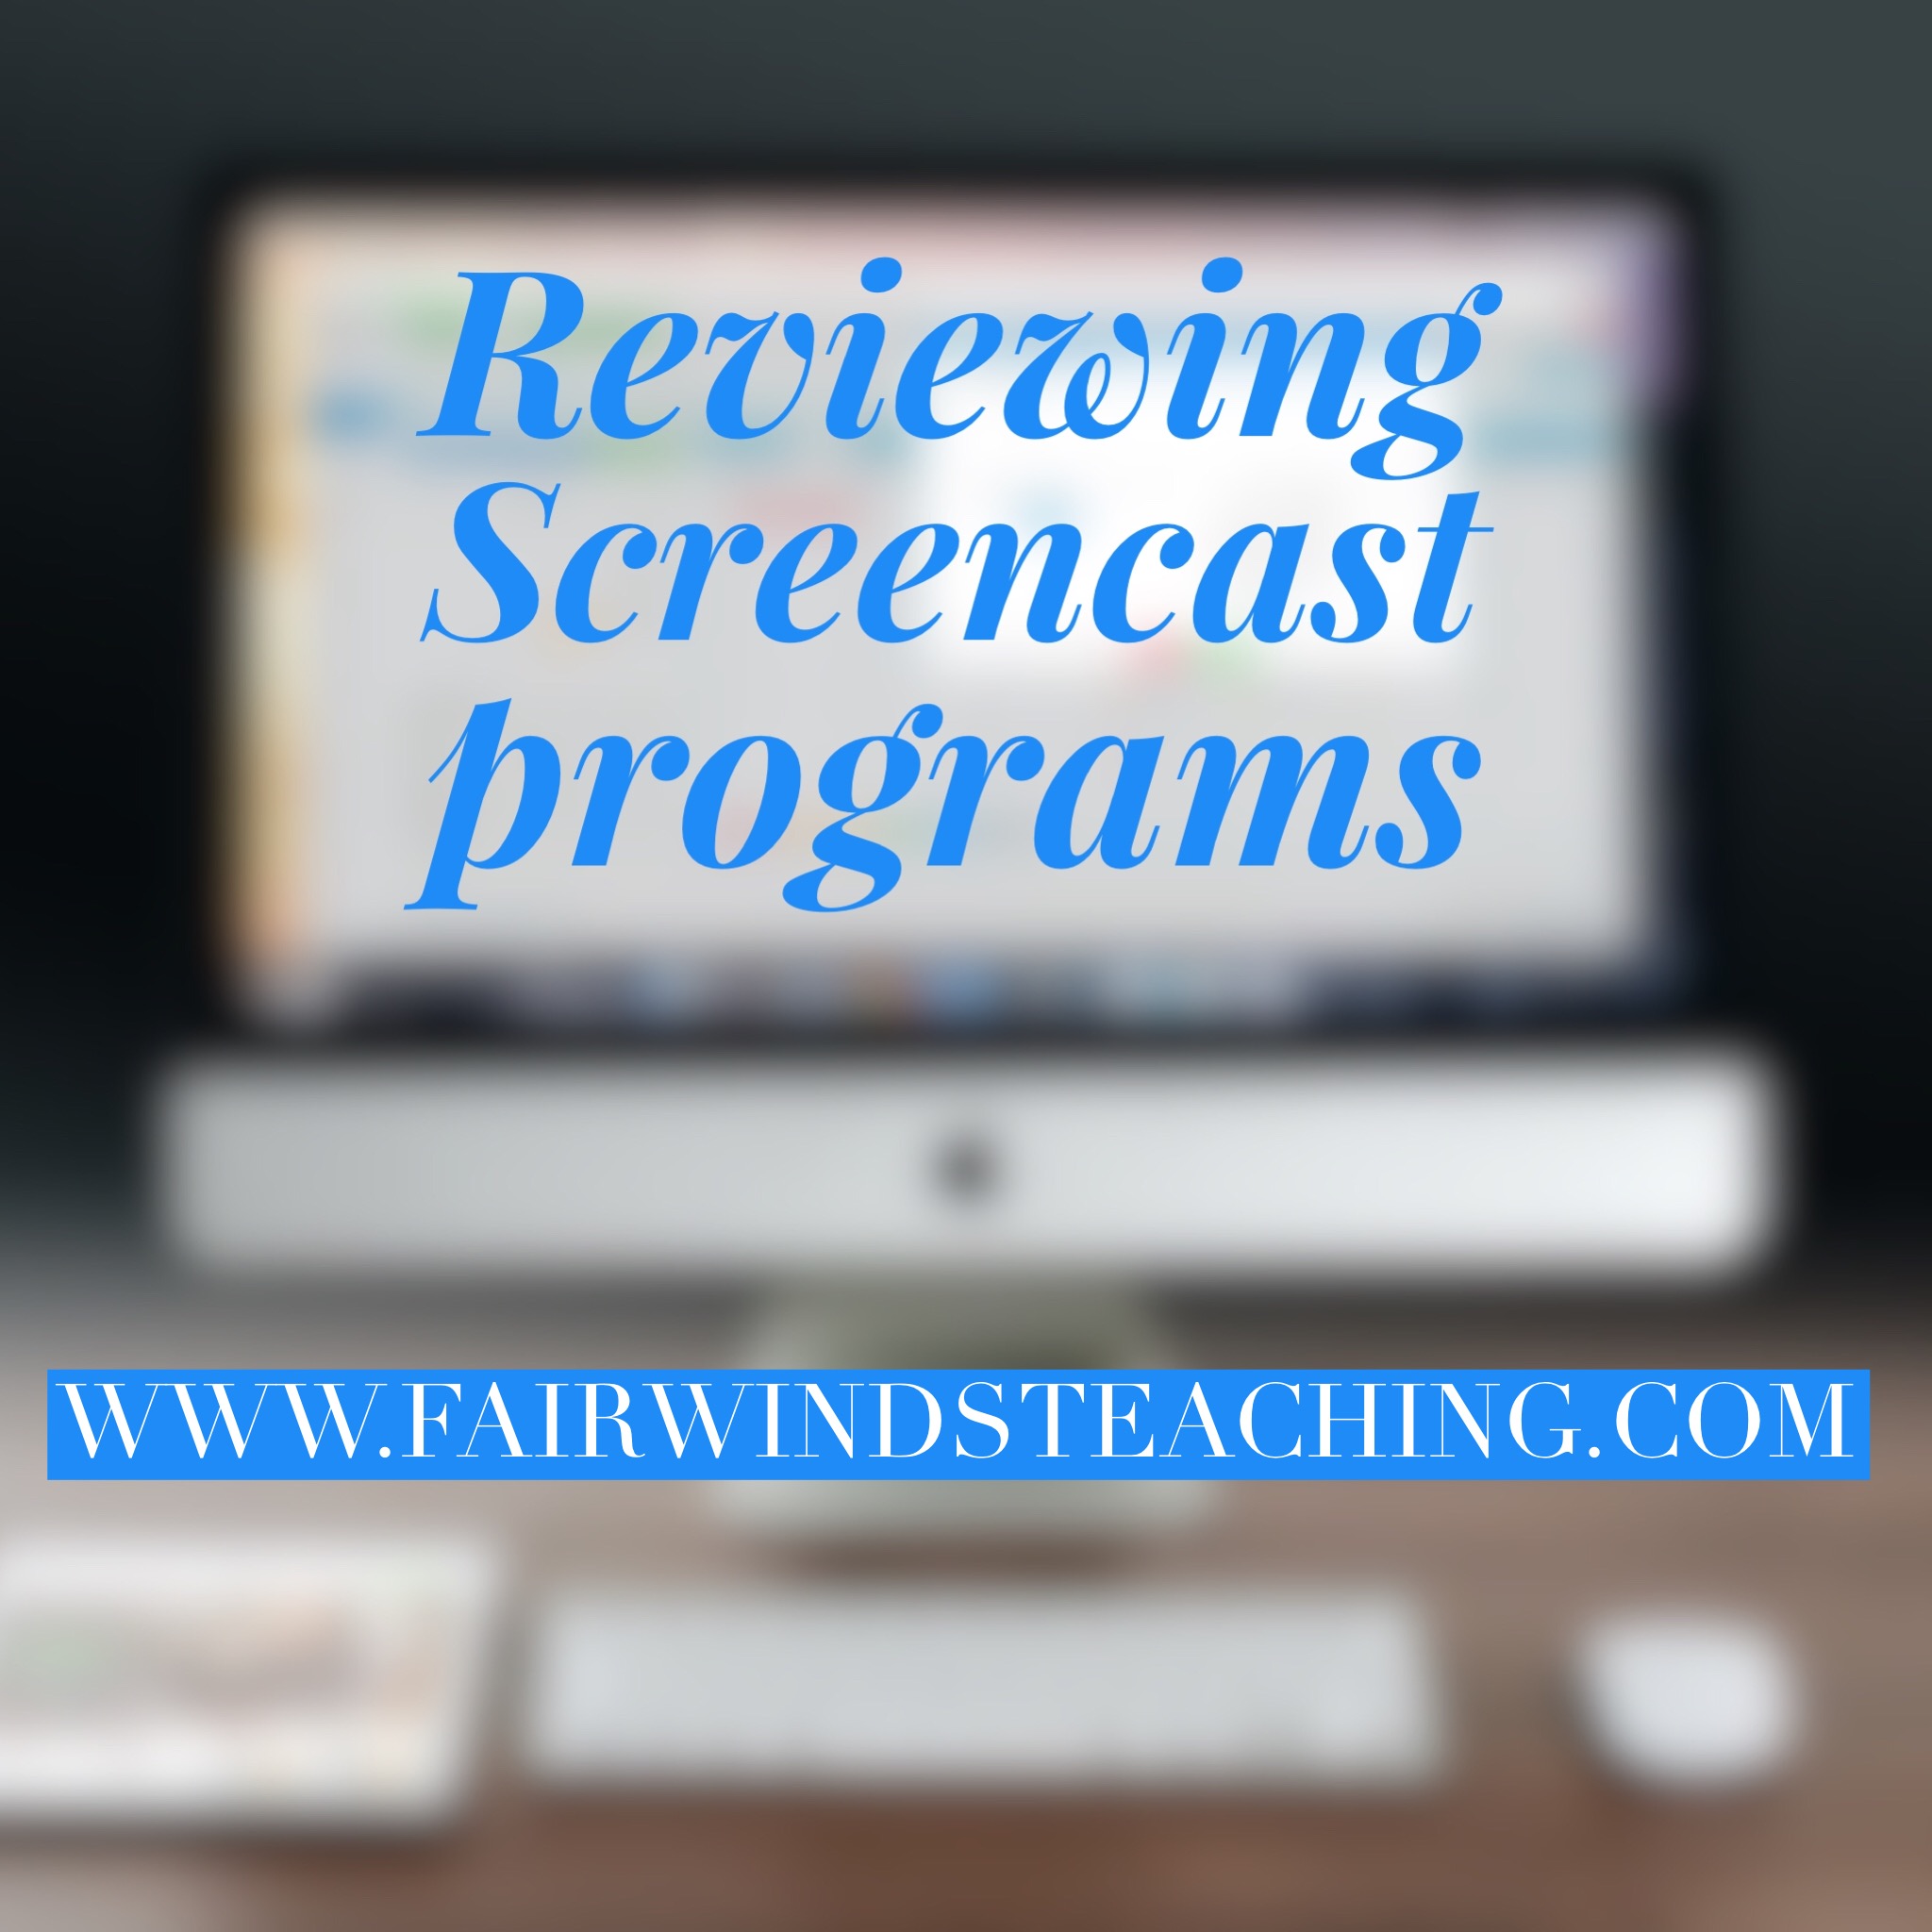 Screencast Programs… Which is the best?